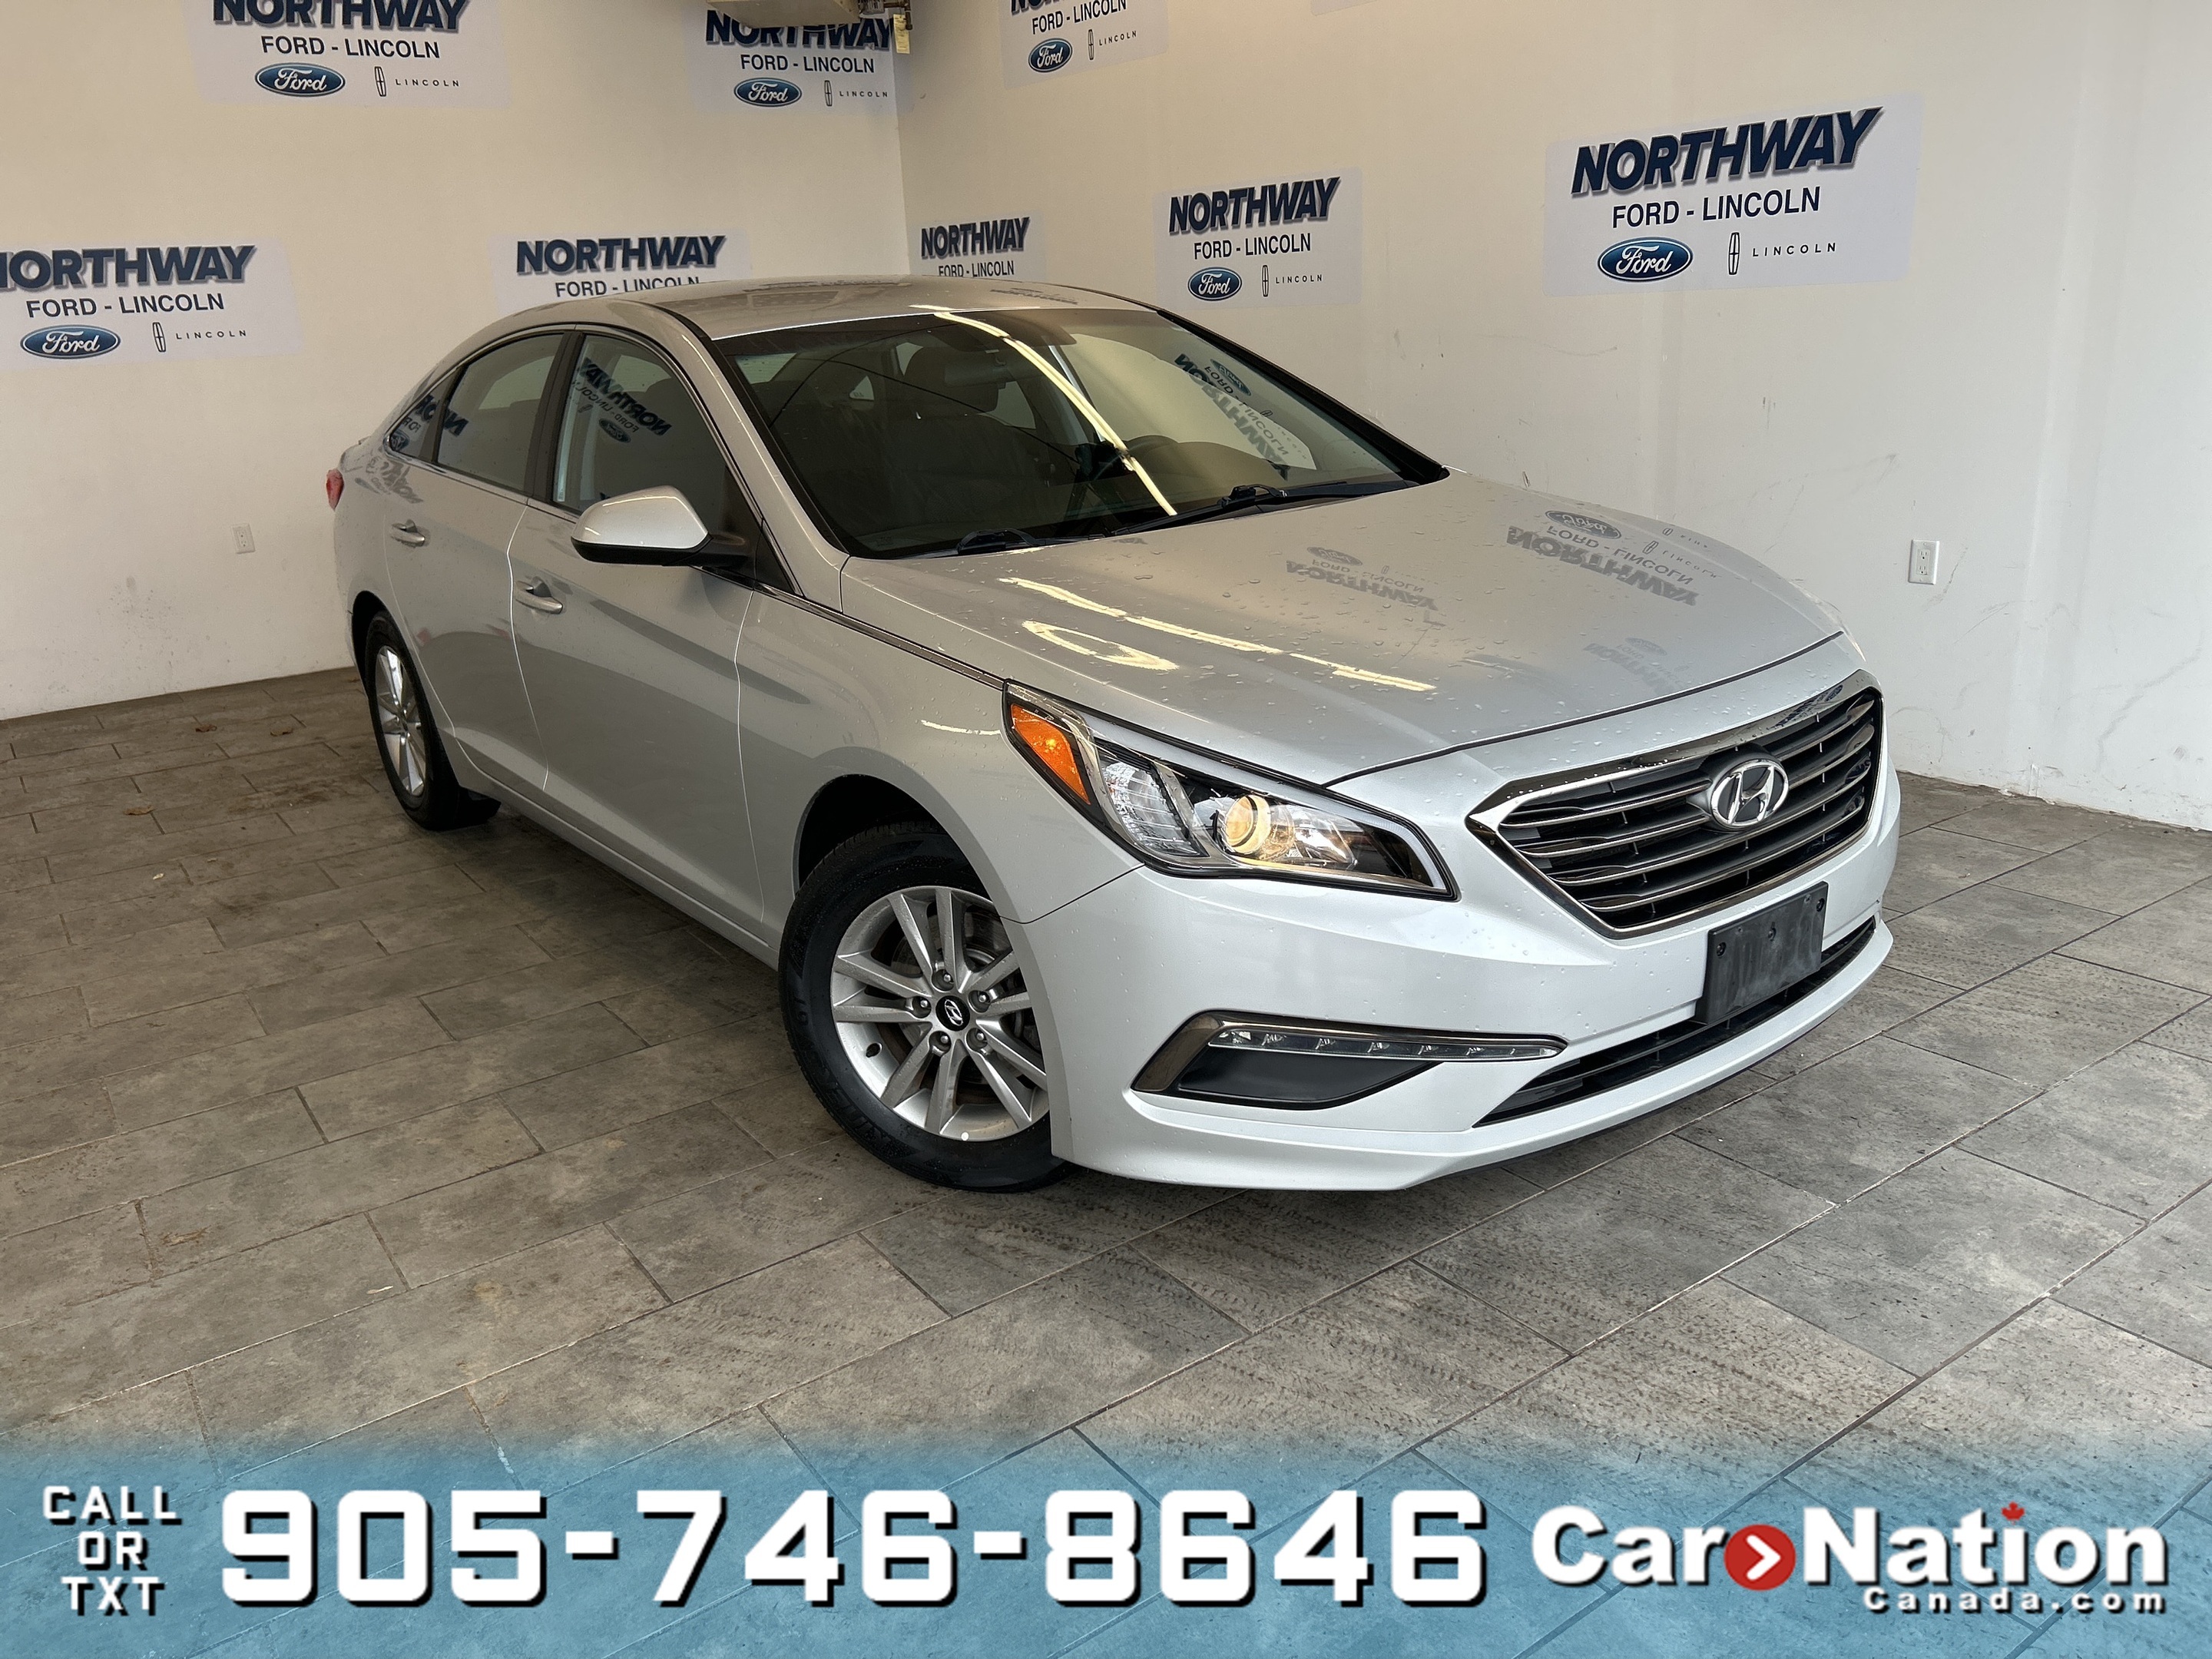 2016 Hyundai Sonata GL | TOUCHSCREEN | 1 OWNER | WE WANT YOUR TRADE